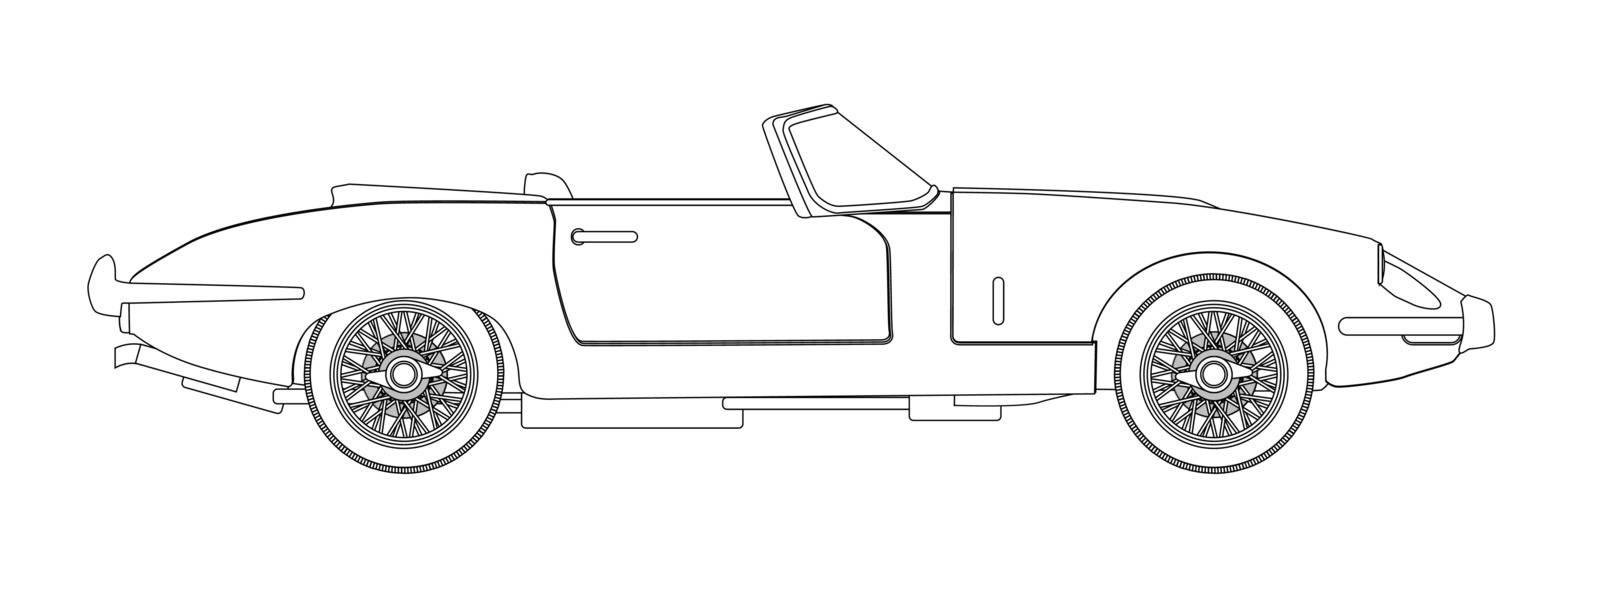 A typical sleak British style open top sports car in outline